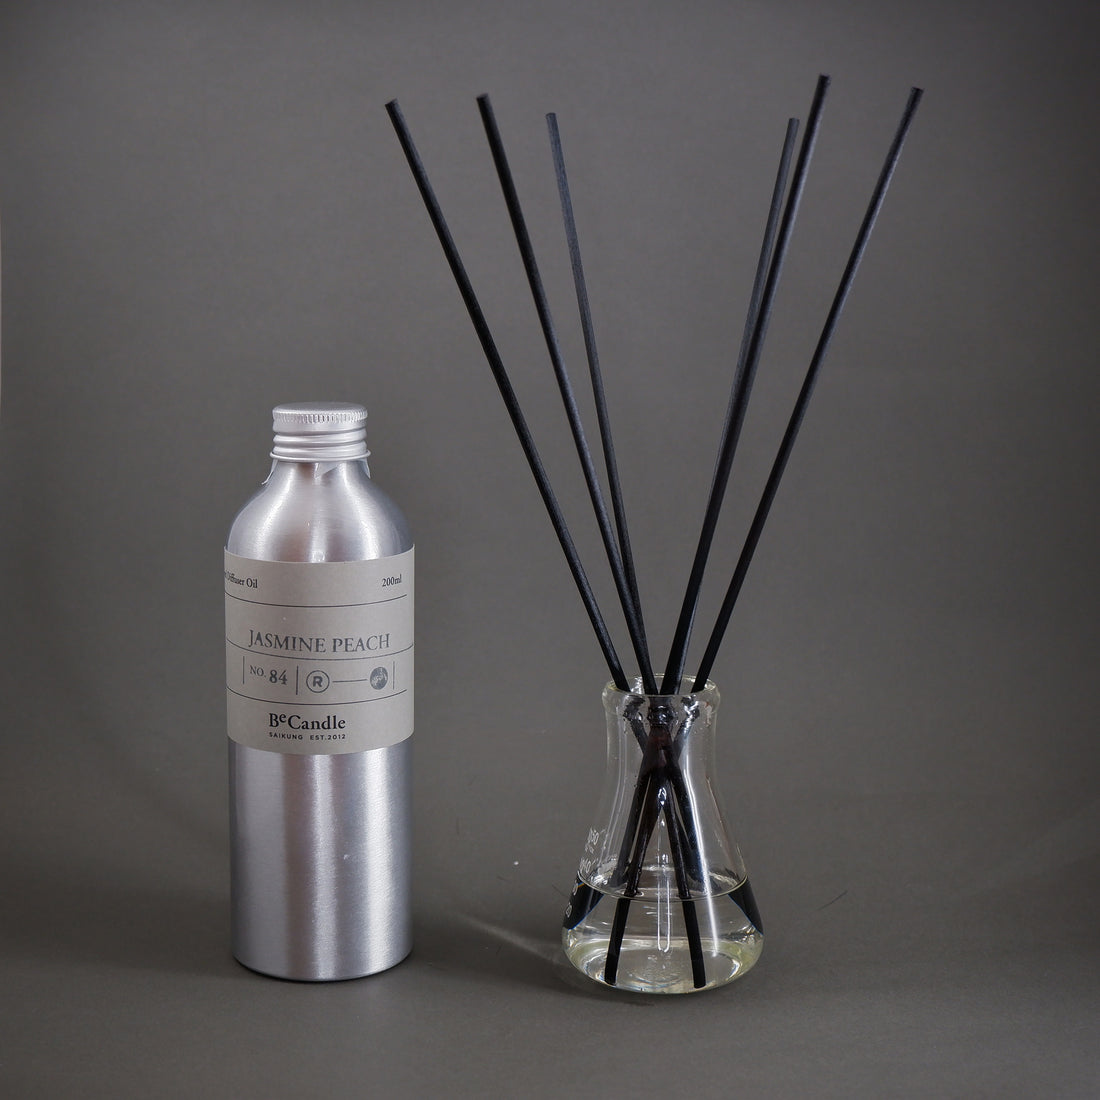 becandle-reed-diffuser-200ml-jasmine-peach-made-in-sai-kung